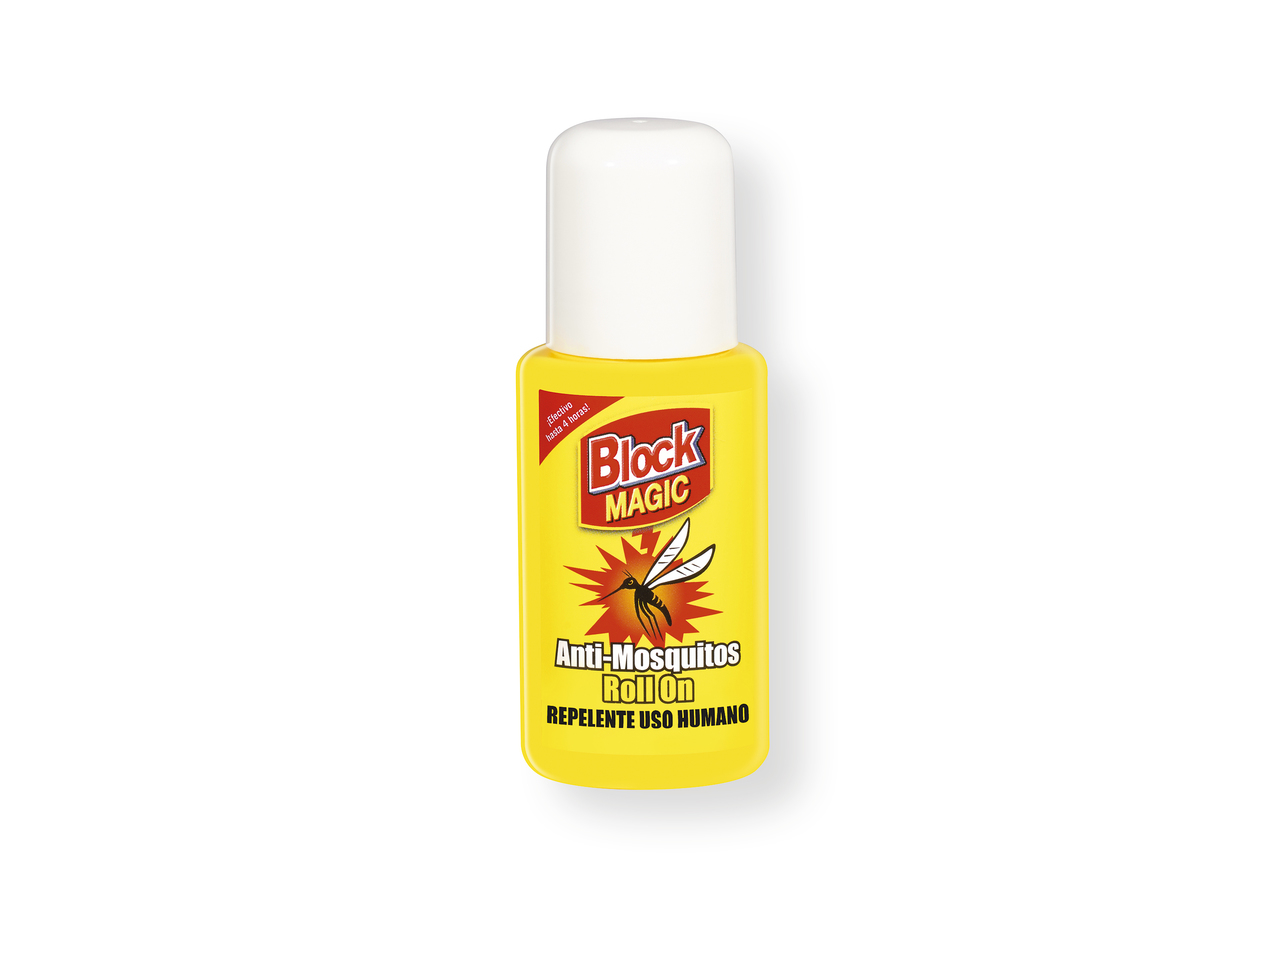 'Block magic(R)' Protector natural antimosquitos roll-on